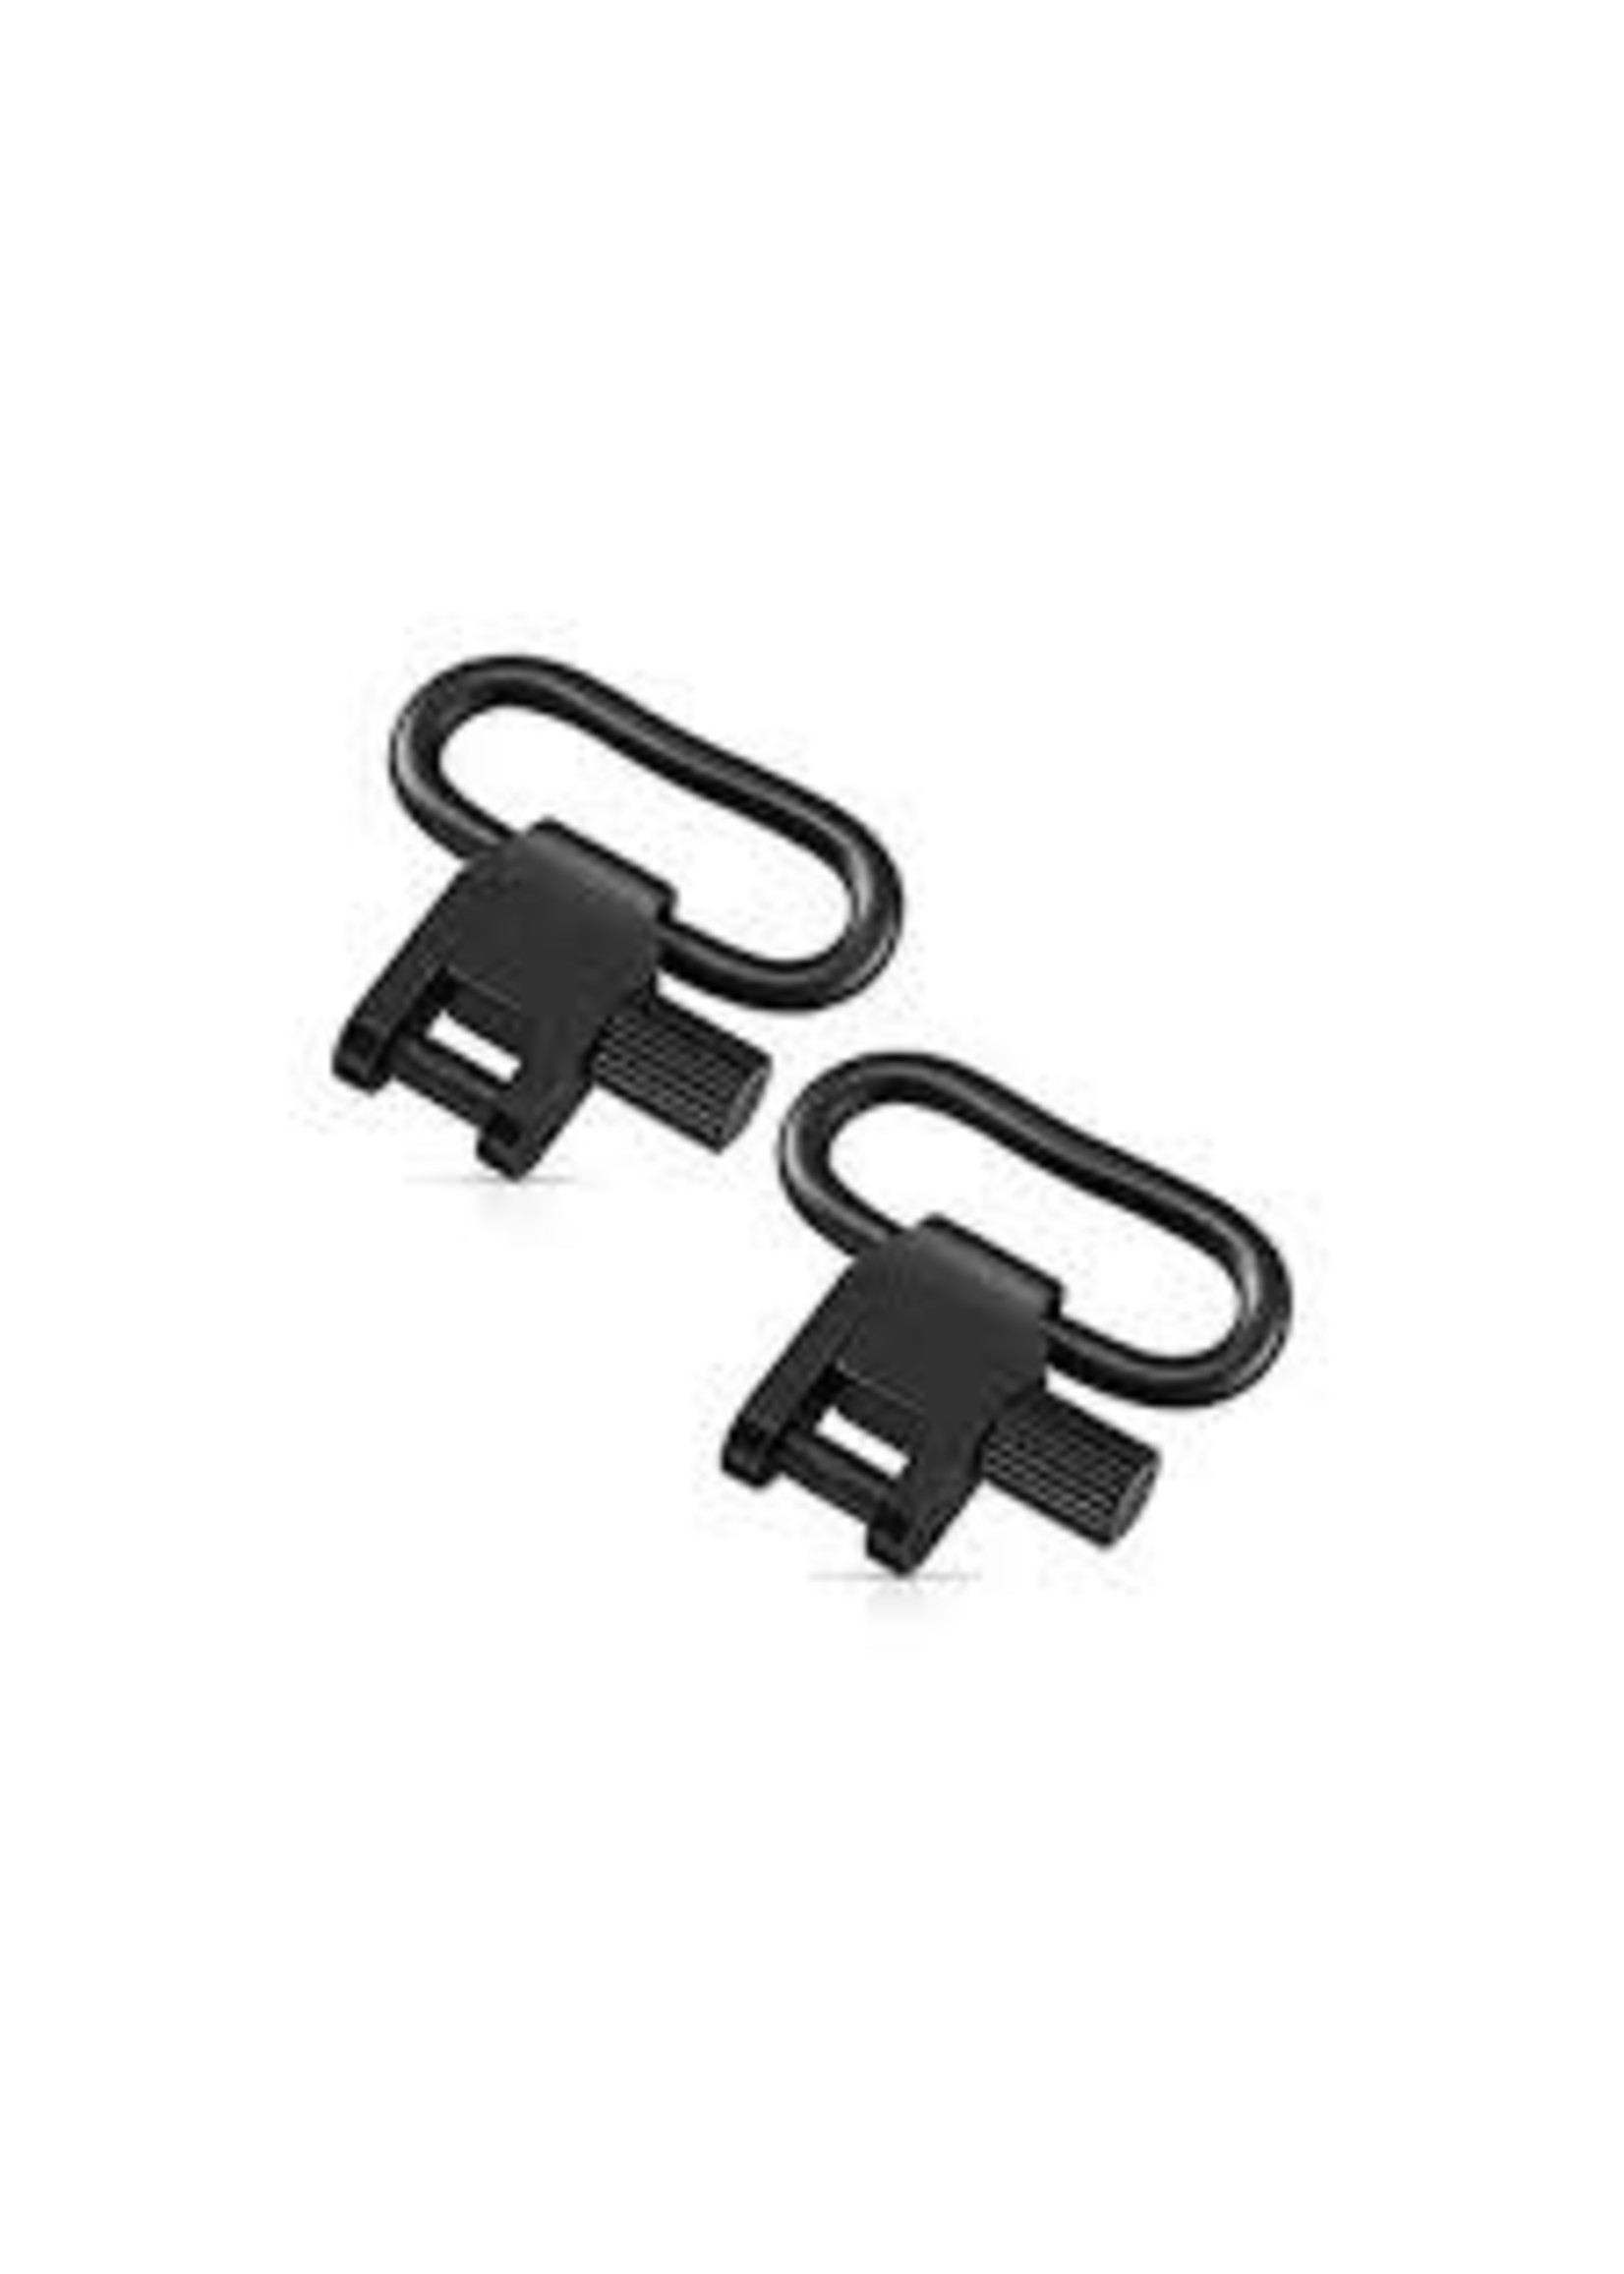 HQ OUTFITTERS HQ OUTFITTERS 1" QUICK DETACH SLING SWIVEL SET